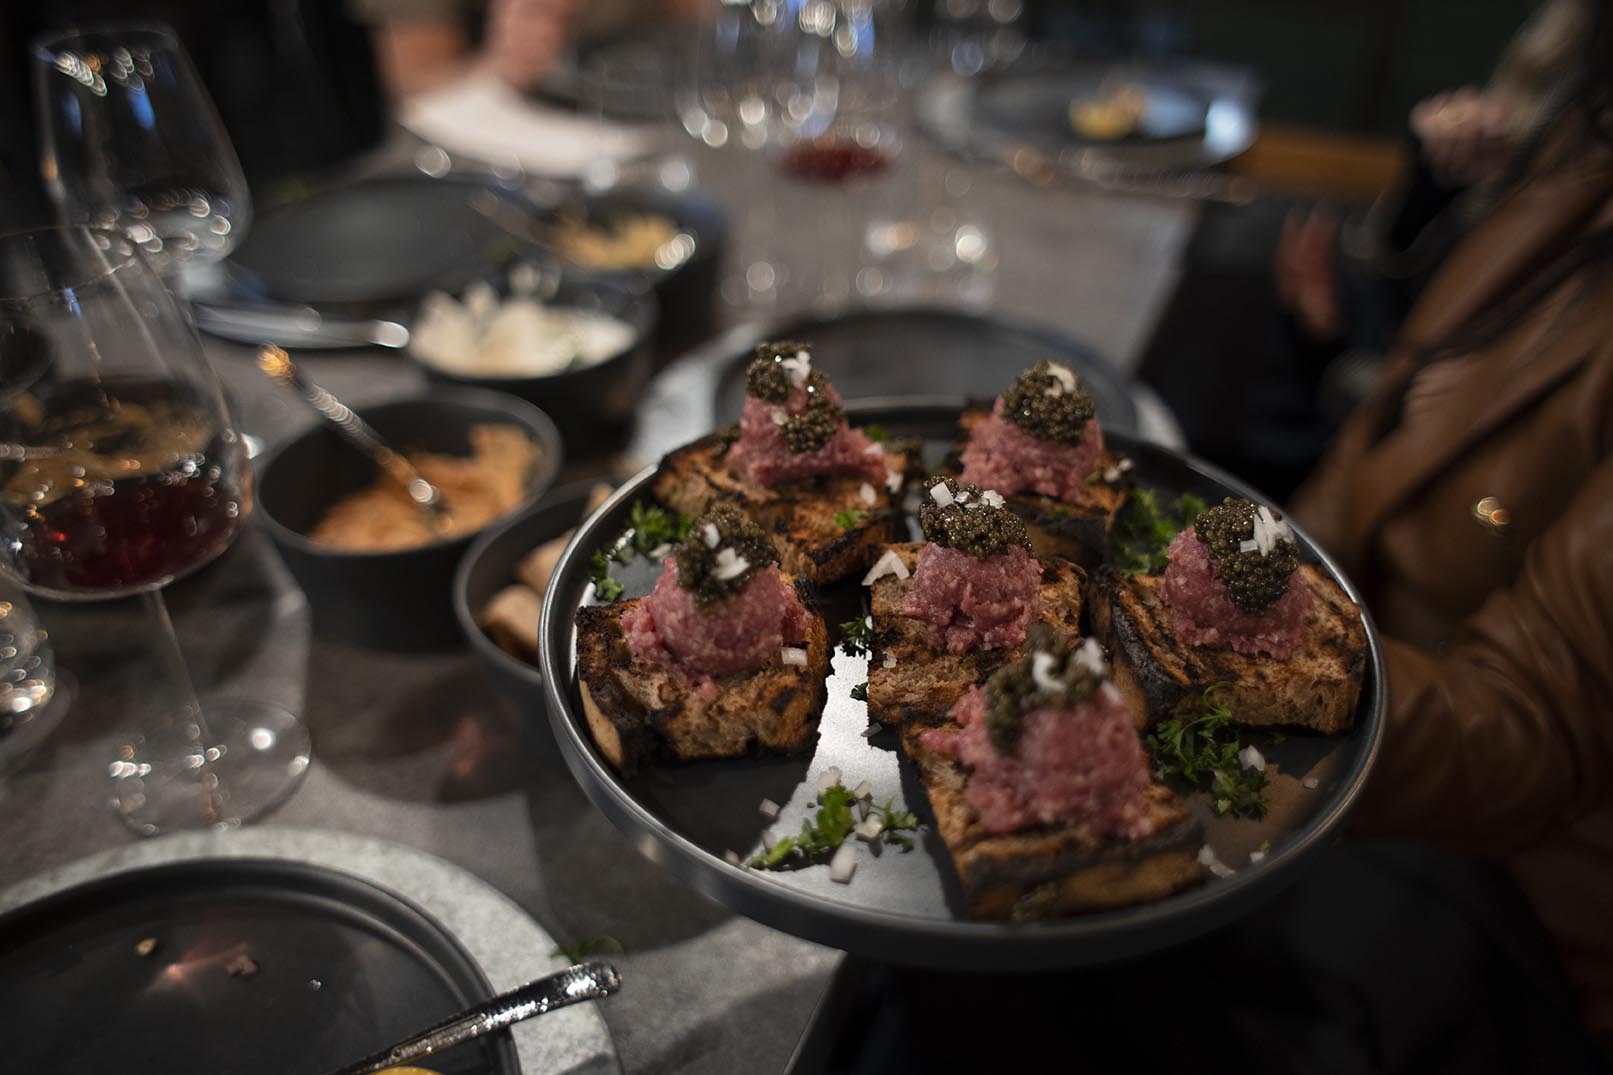 In the Hummus Labs restaurant the Lebanese Tartare course is held over the table by a guest. The Tartare is served over toast points on a dark grey cermaic plate and topped with Caviar. Wine glasses and other dishes are blurred in the background.